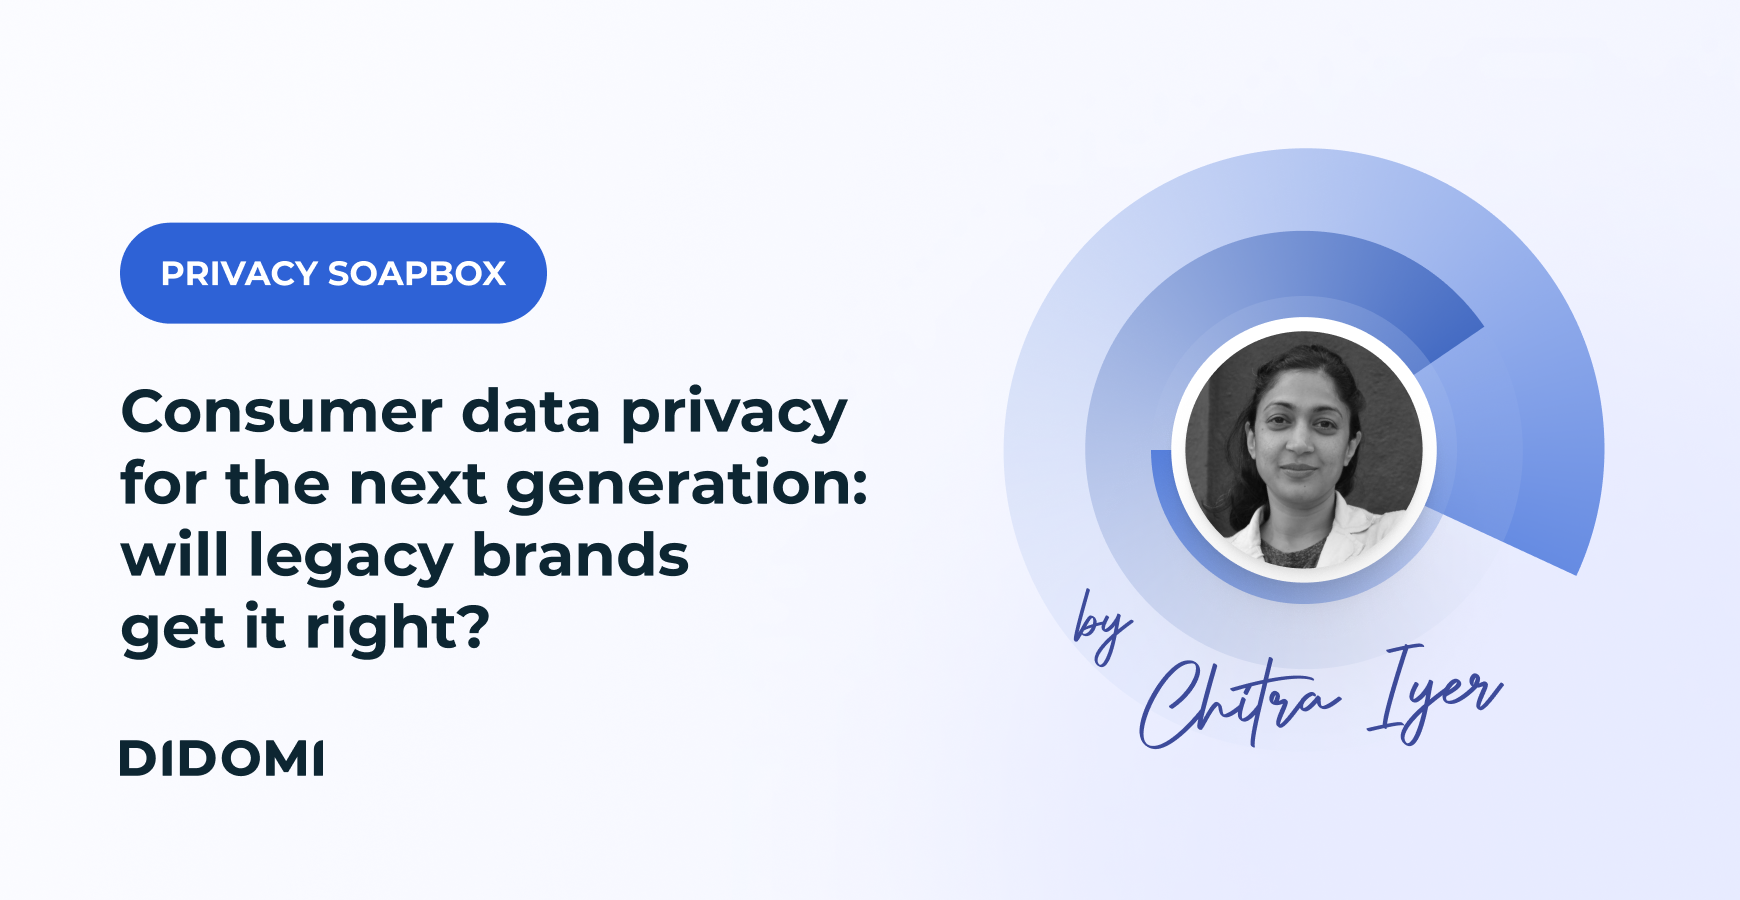 Portrait of the author, along with the label "Privacy soapbox" and the title of the article "Consumer data privacy for the next generation: will legacy brands get it right?"